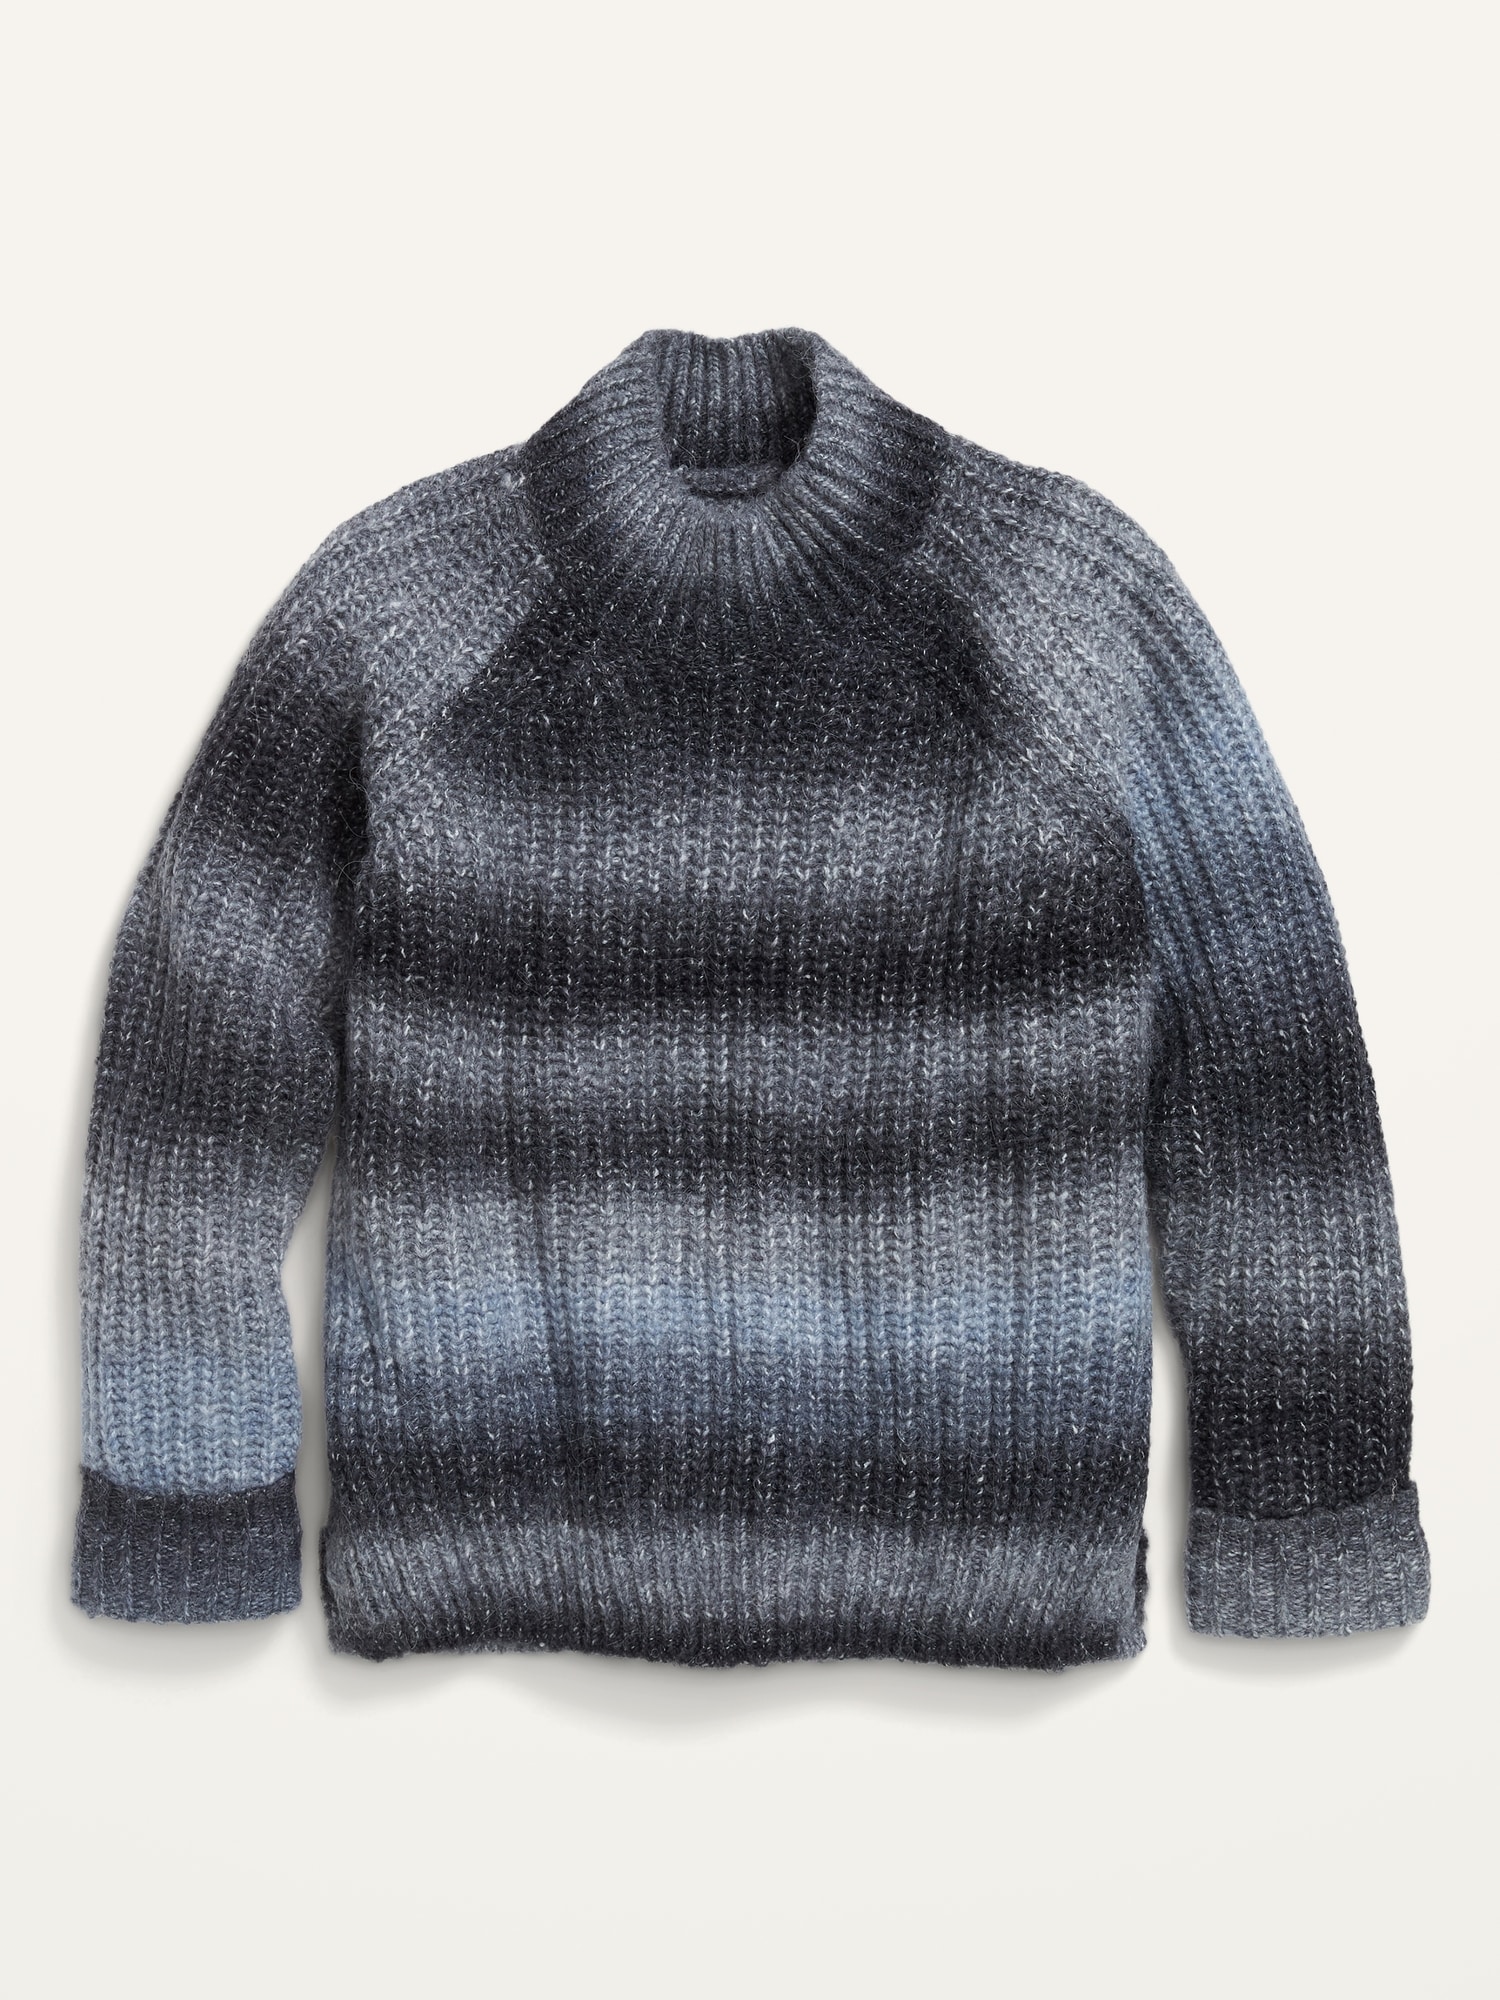 Cozy Textured Shaker-Stitch Mock-Neck Ombré Sweater for Girls | Old Navy